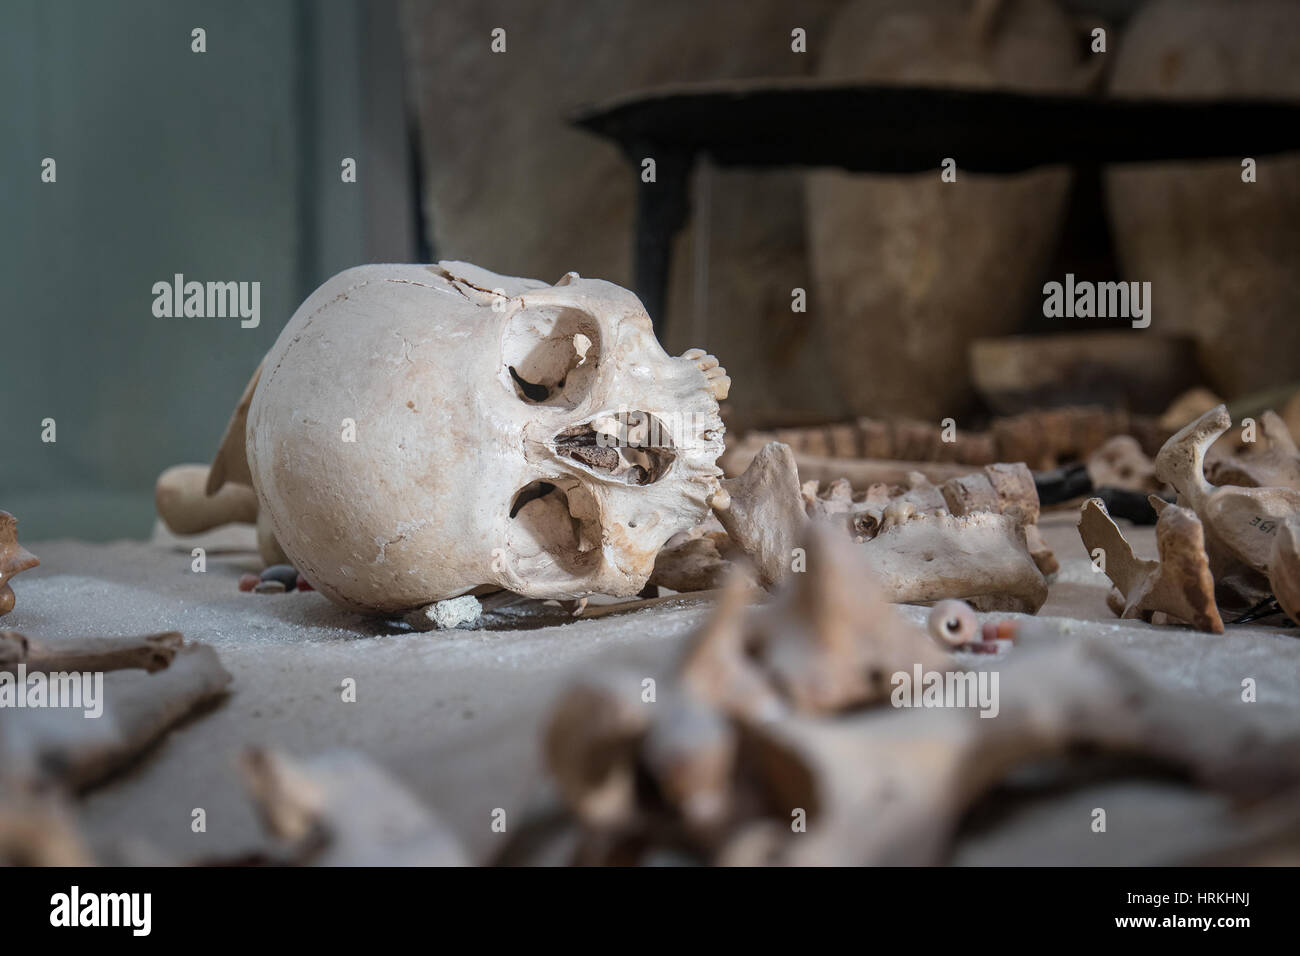 Ancient burial site with a skull and pottery from another milenium Stock Photo